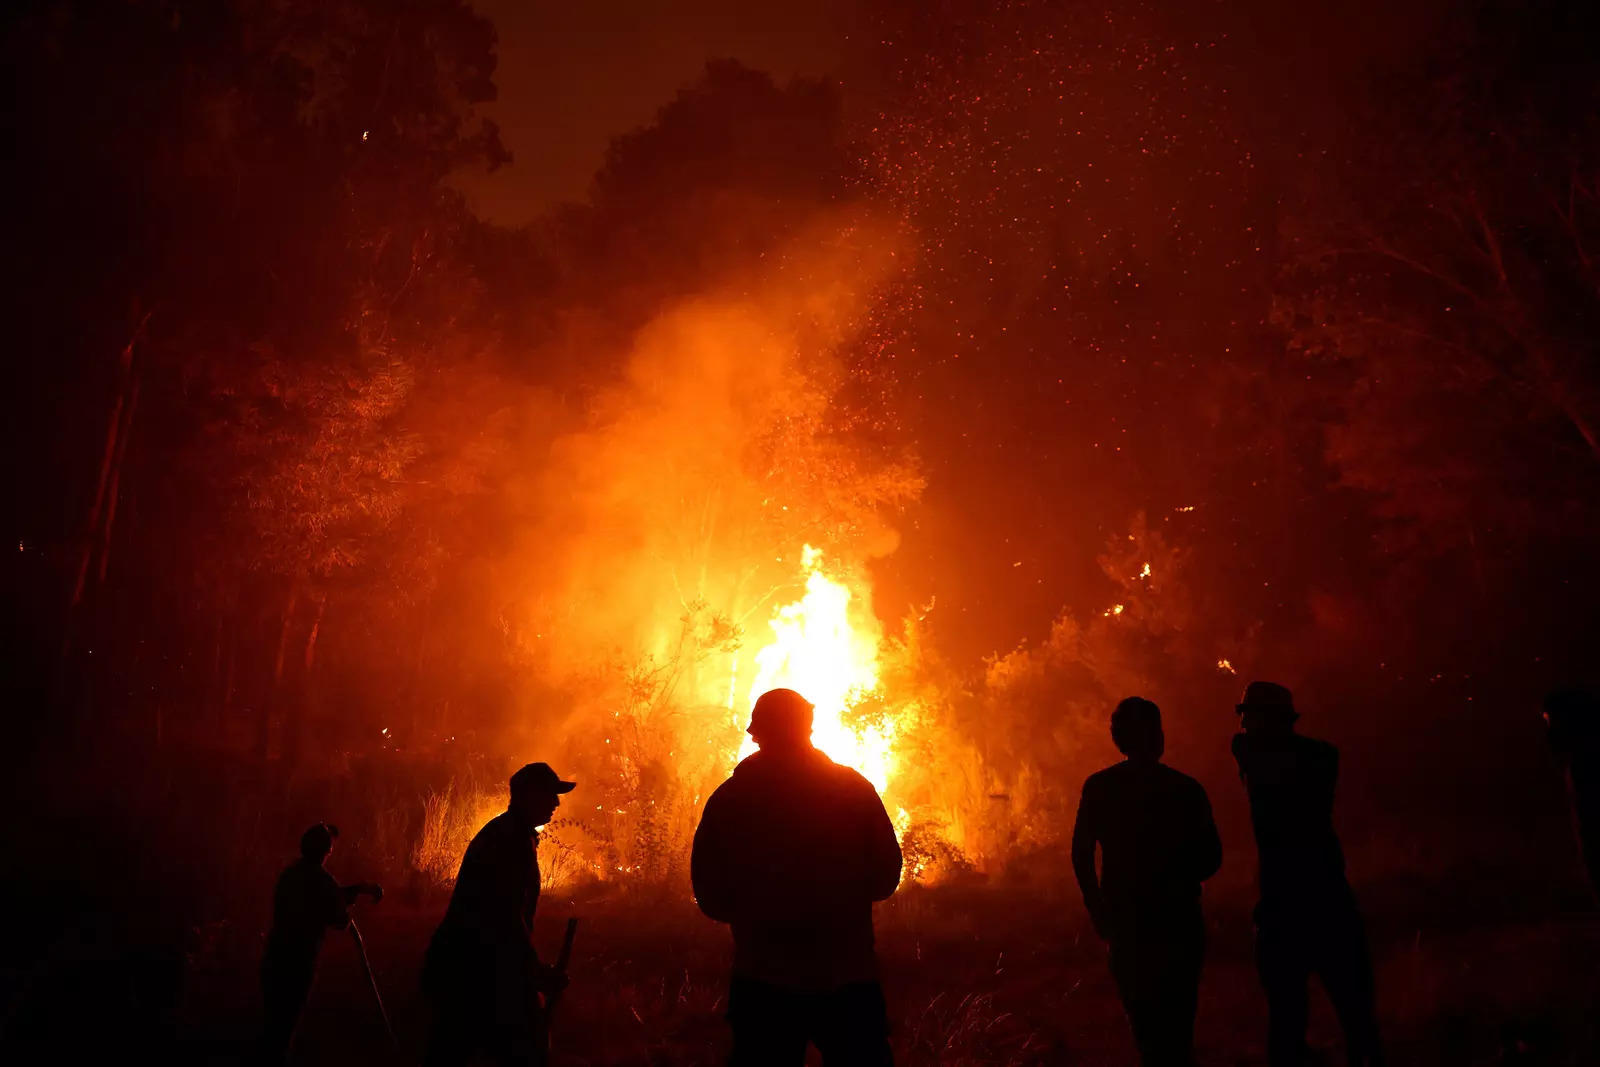 Harrowing pictures from Chile as wildfires engulf huge swathes of land